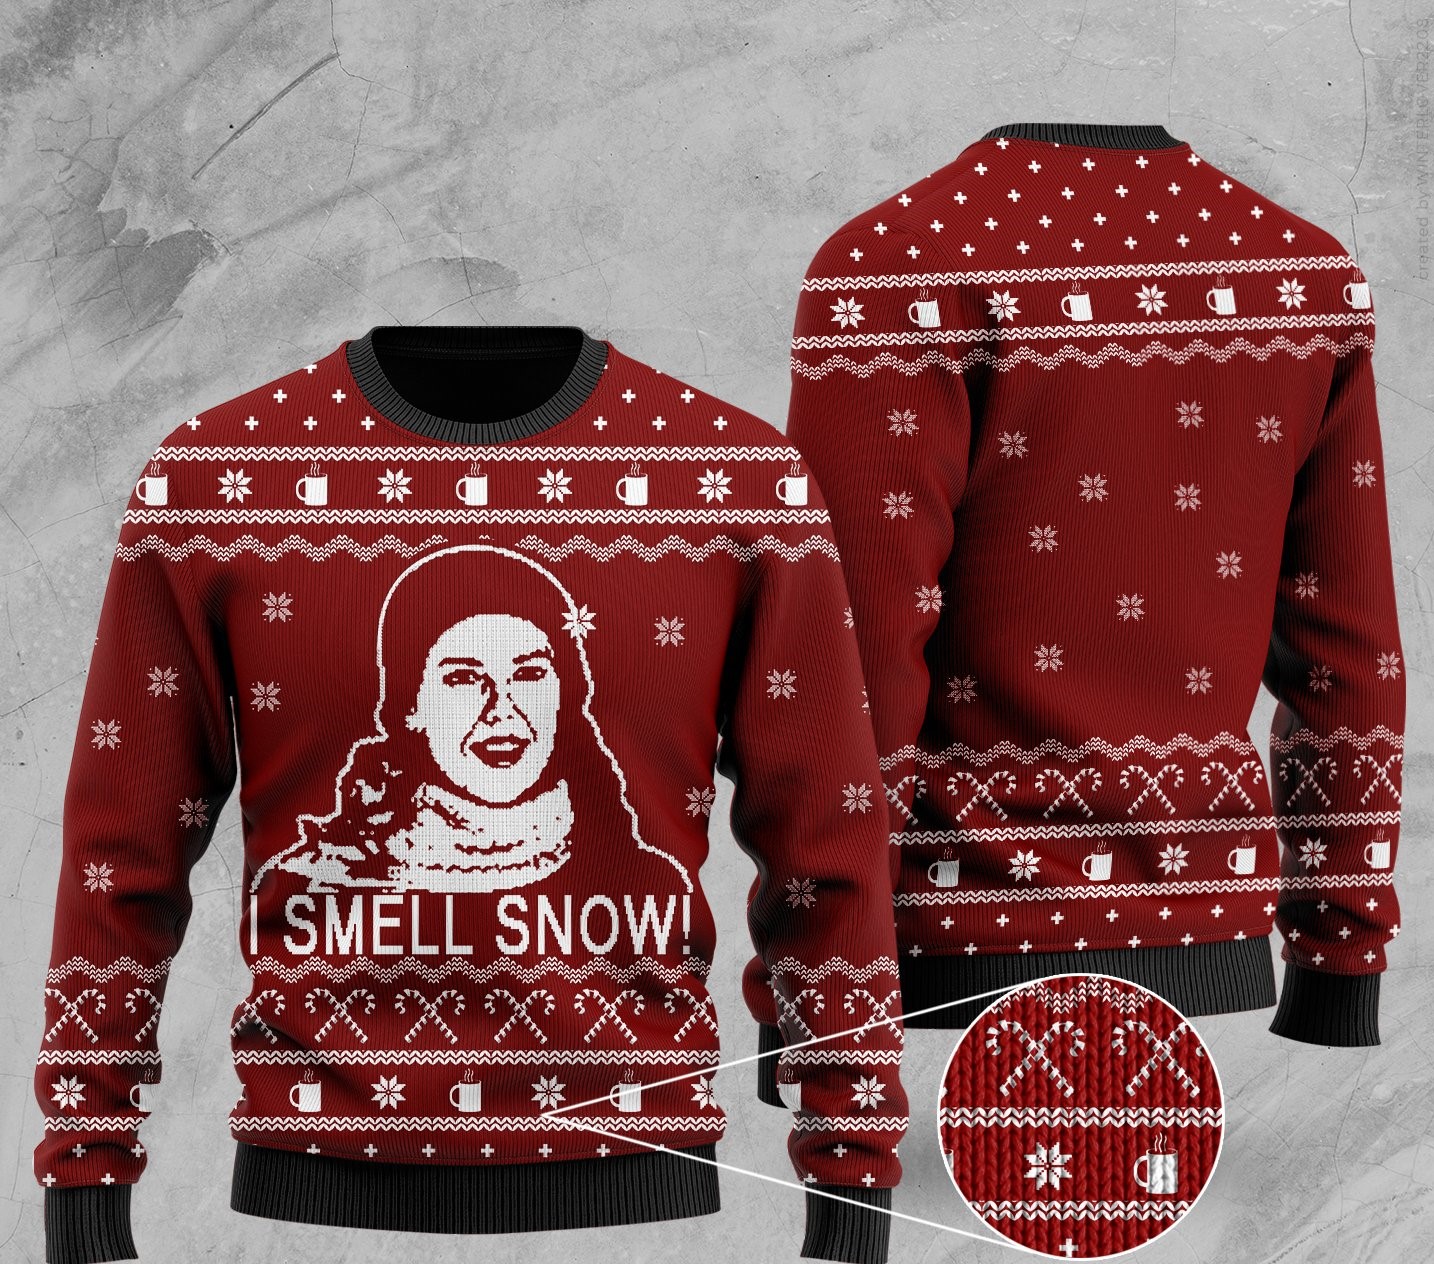 gilmore girls i smell snow all over printed ugly christmas sweater 2